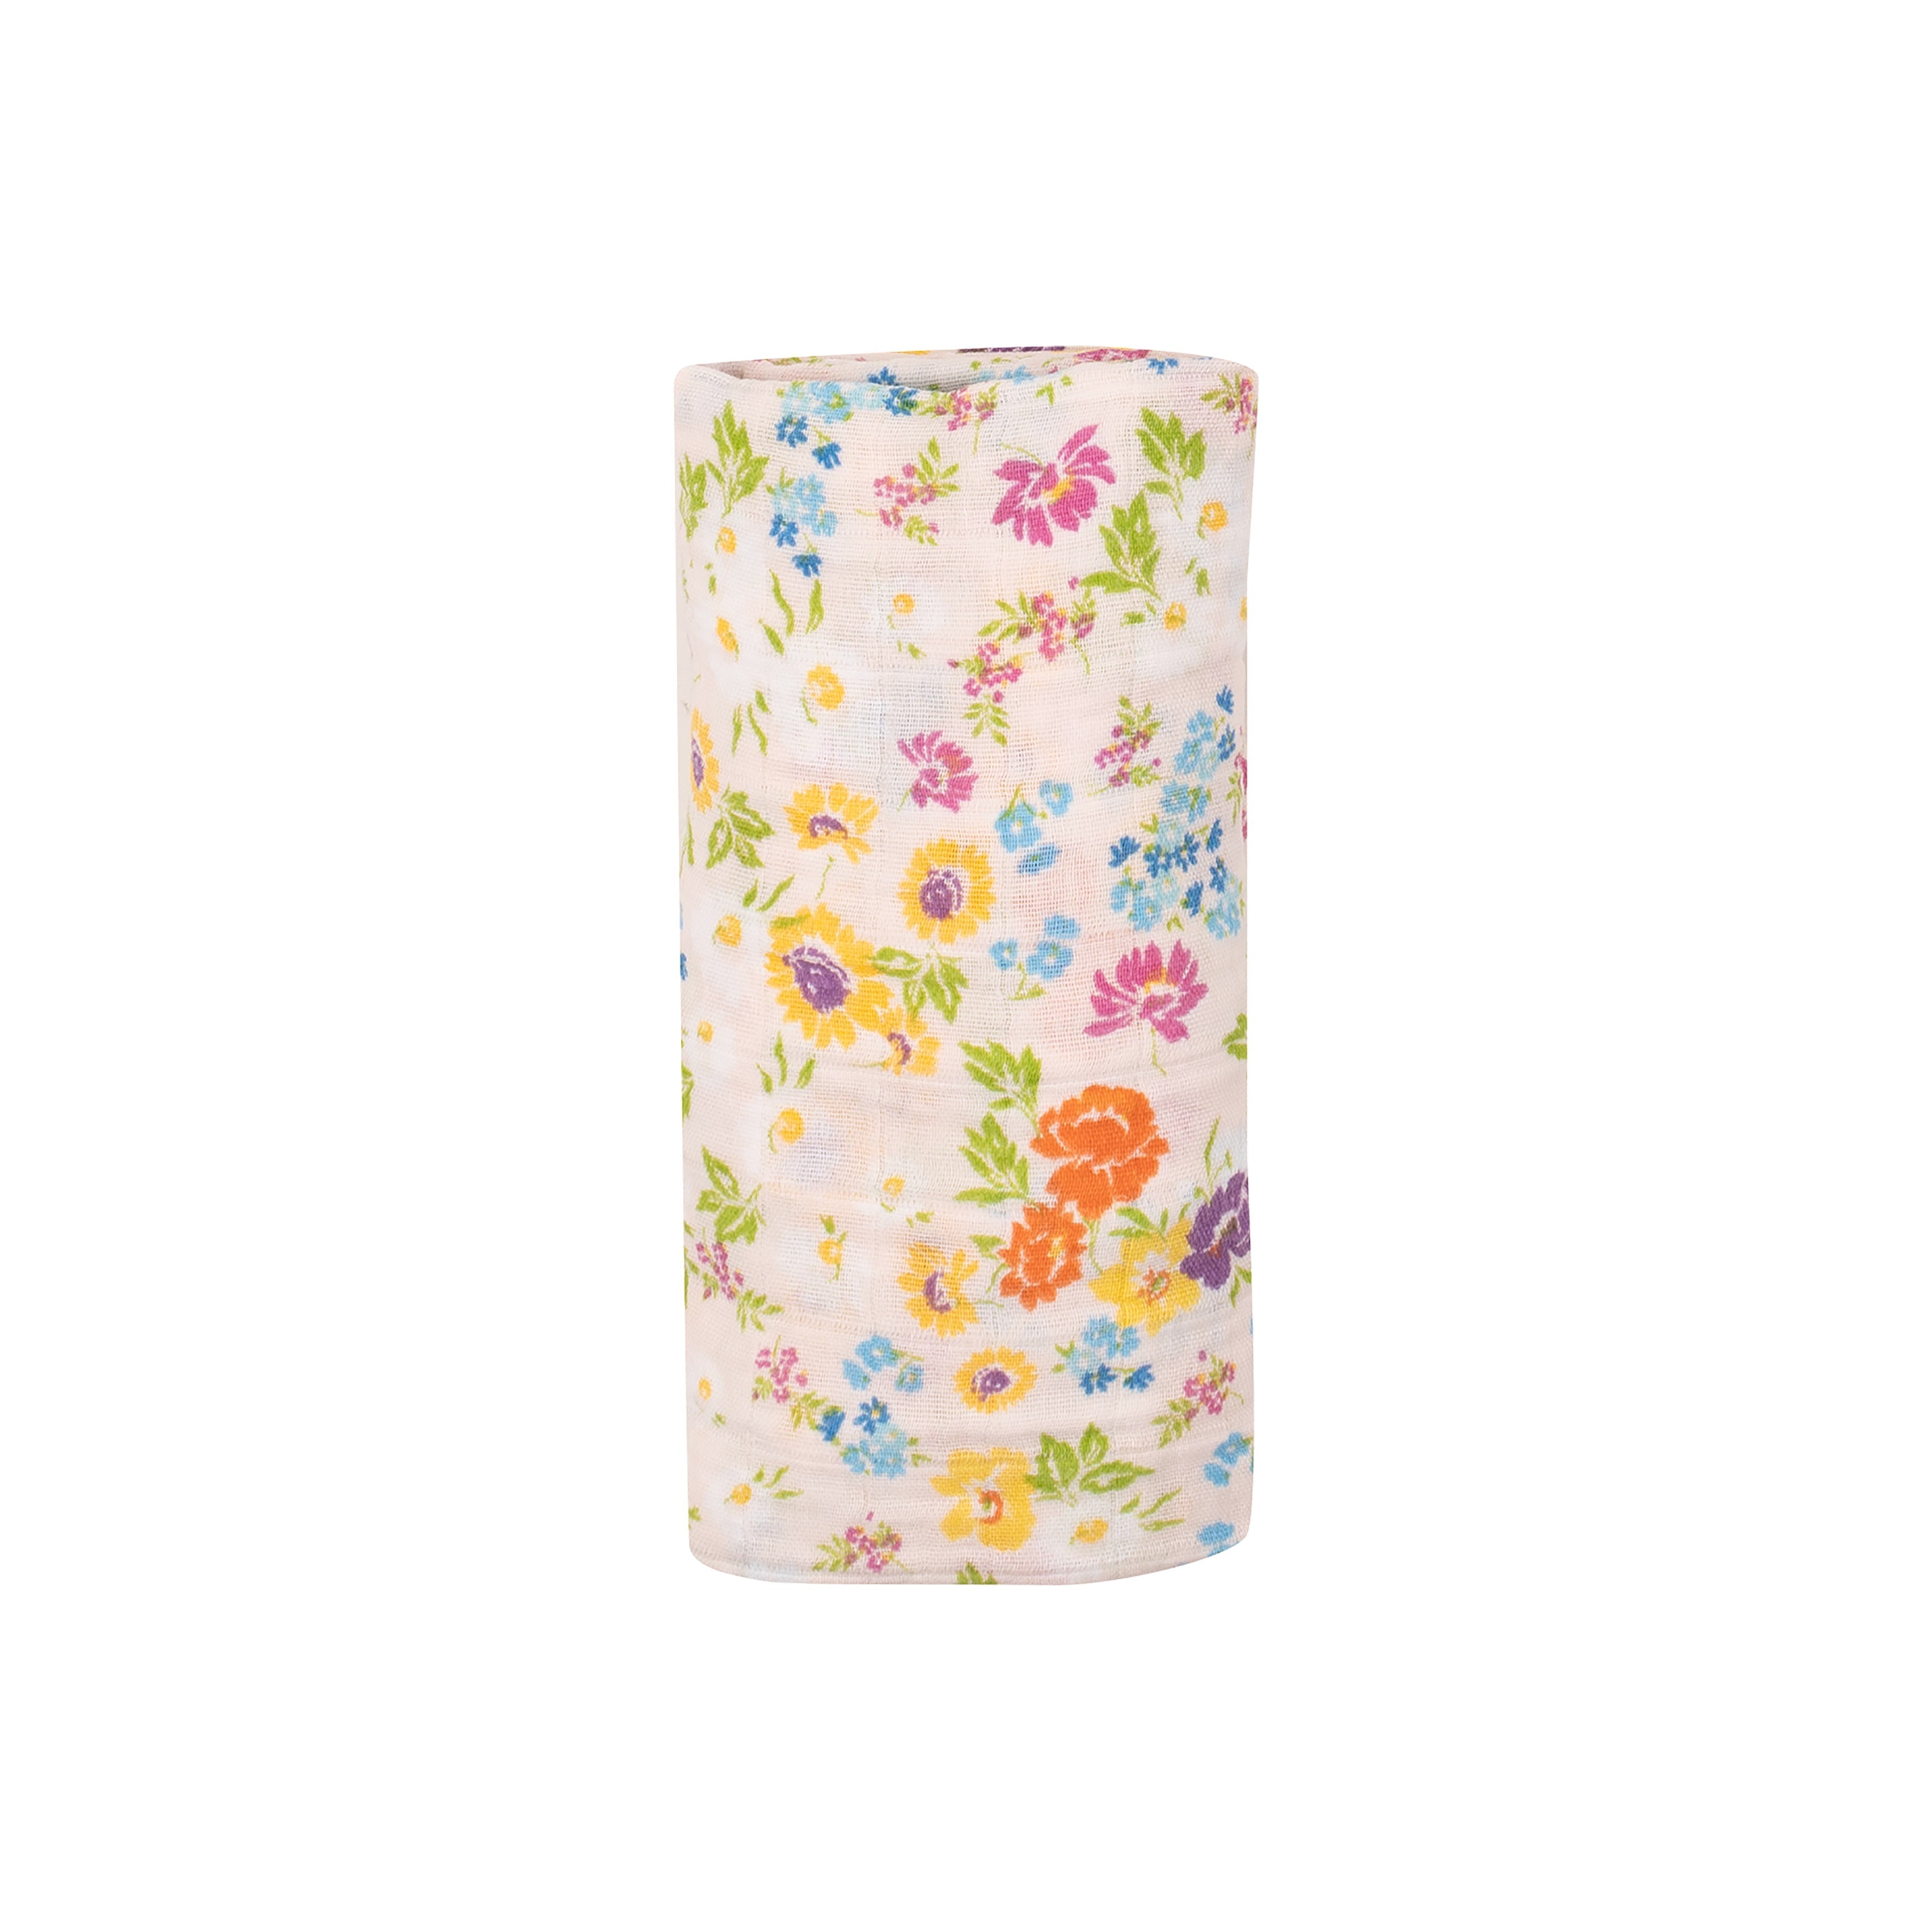 Swaddle Blanket - Cheery Mix Floral